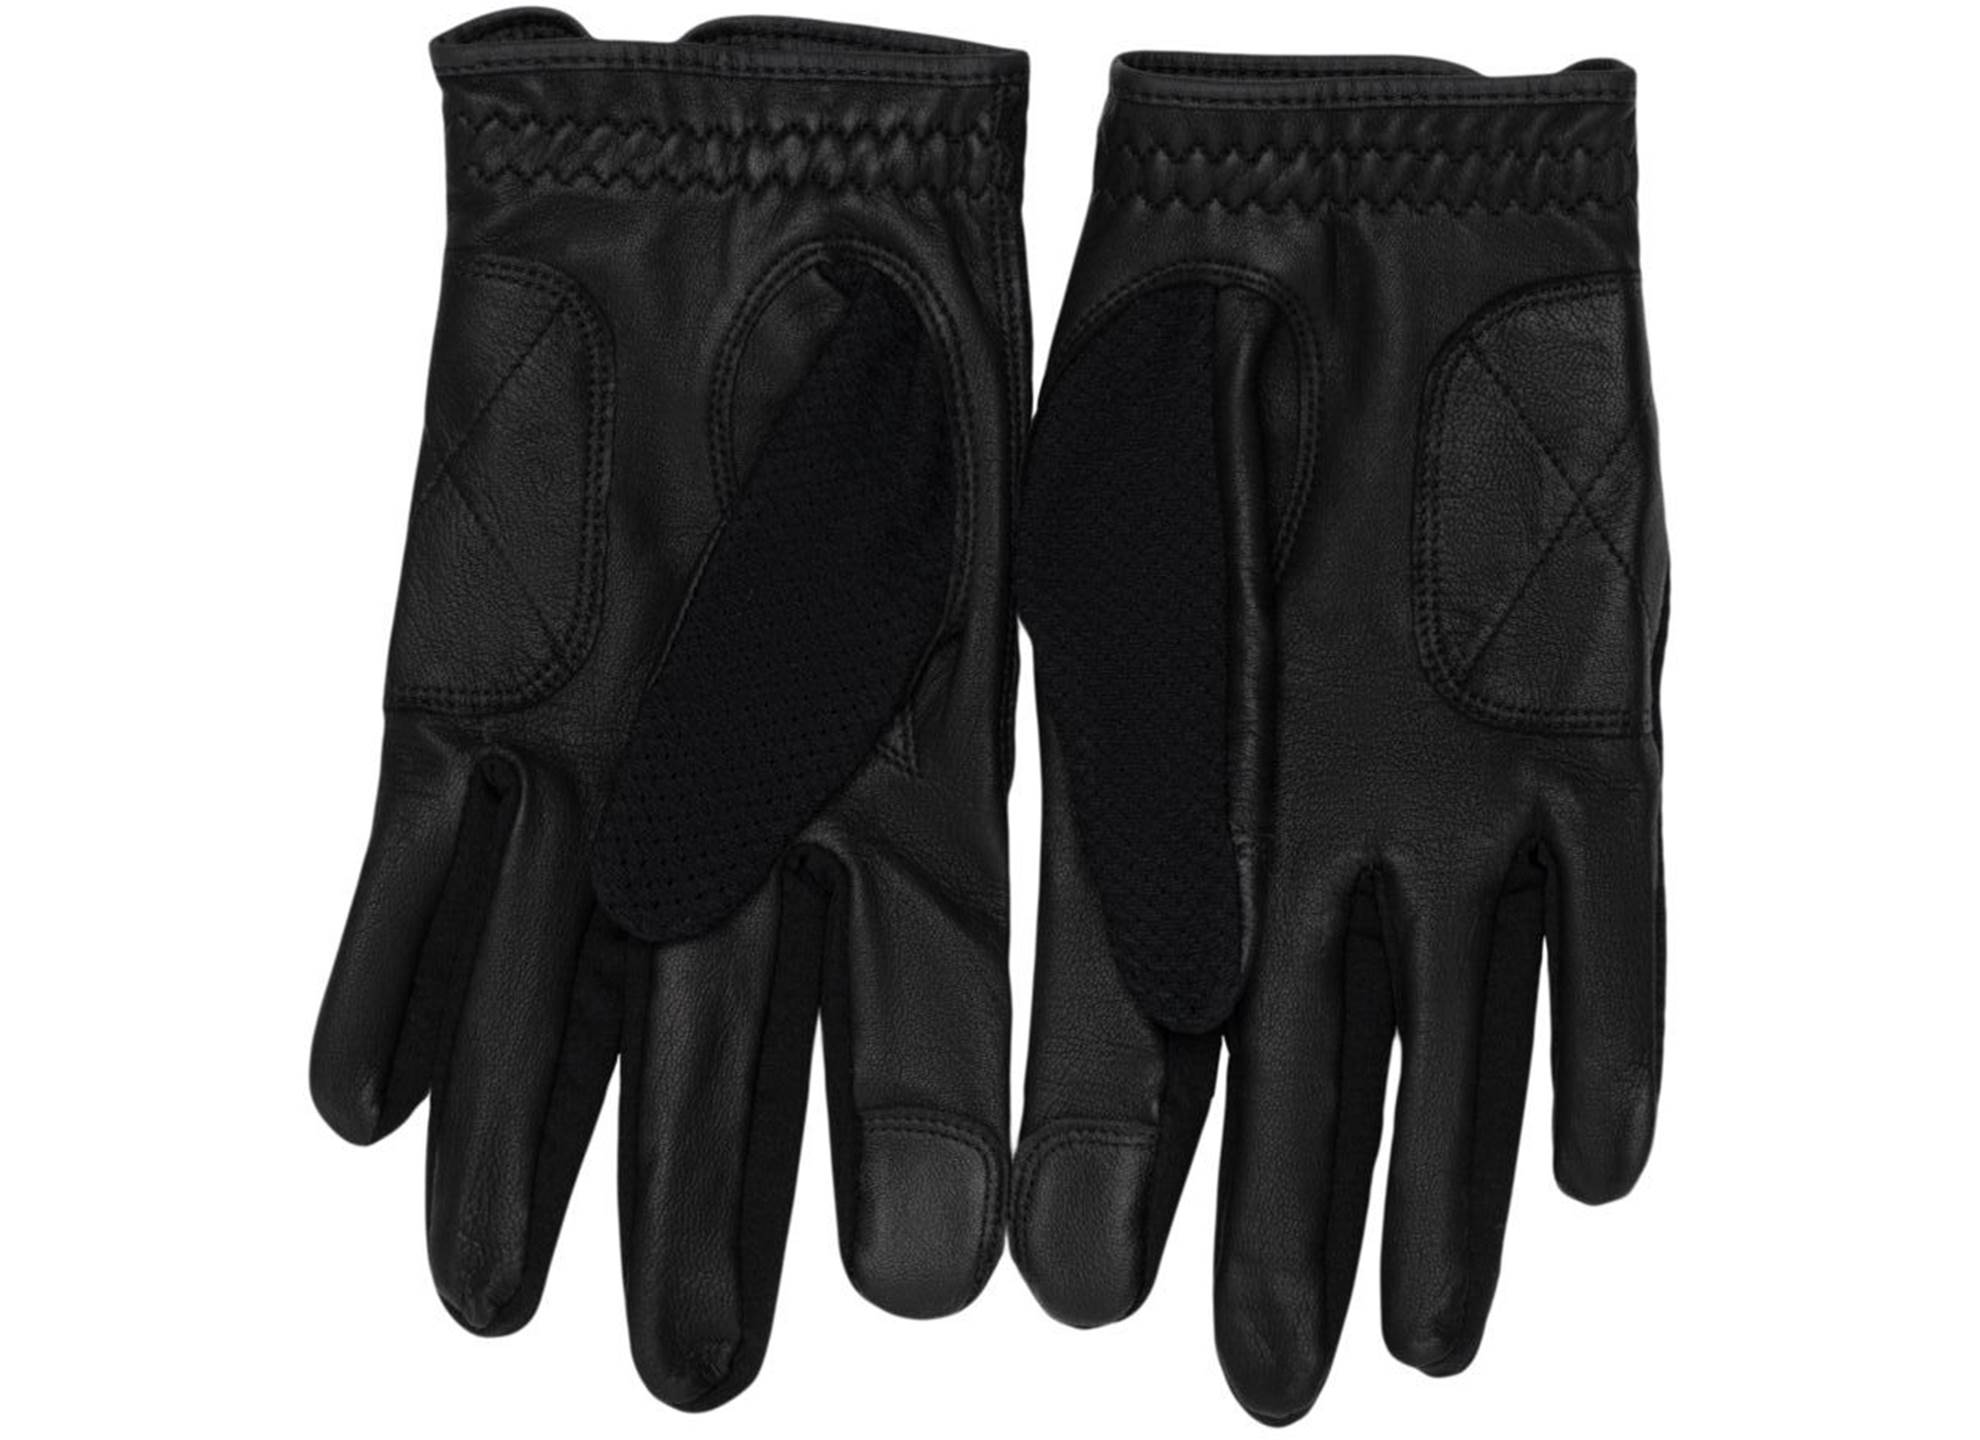 Touchscreen Drummer's Gloves Large